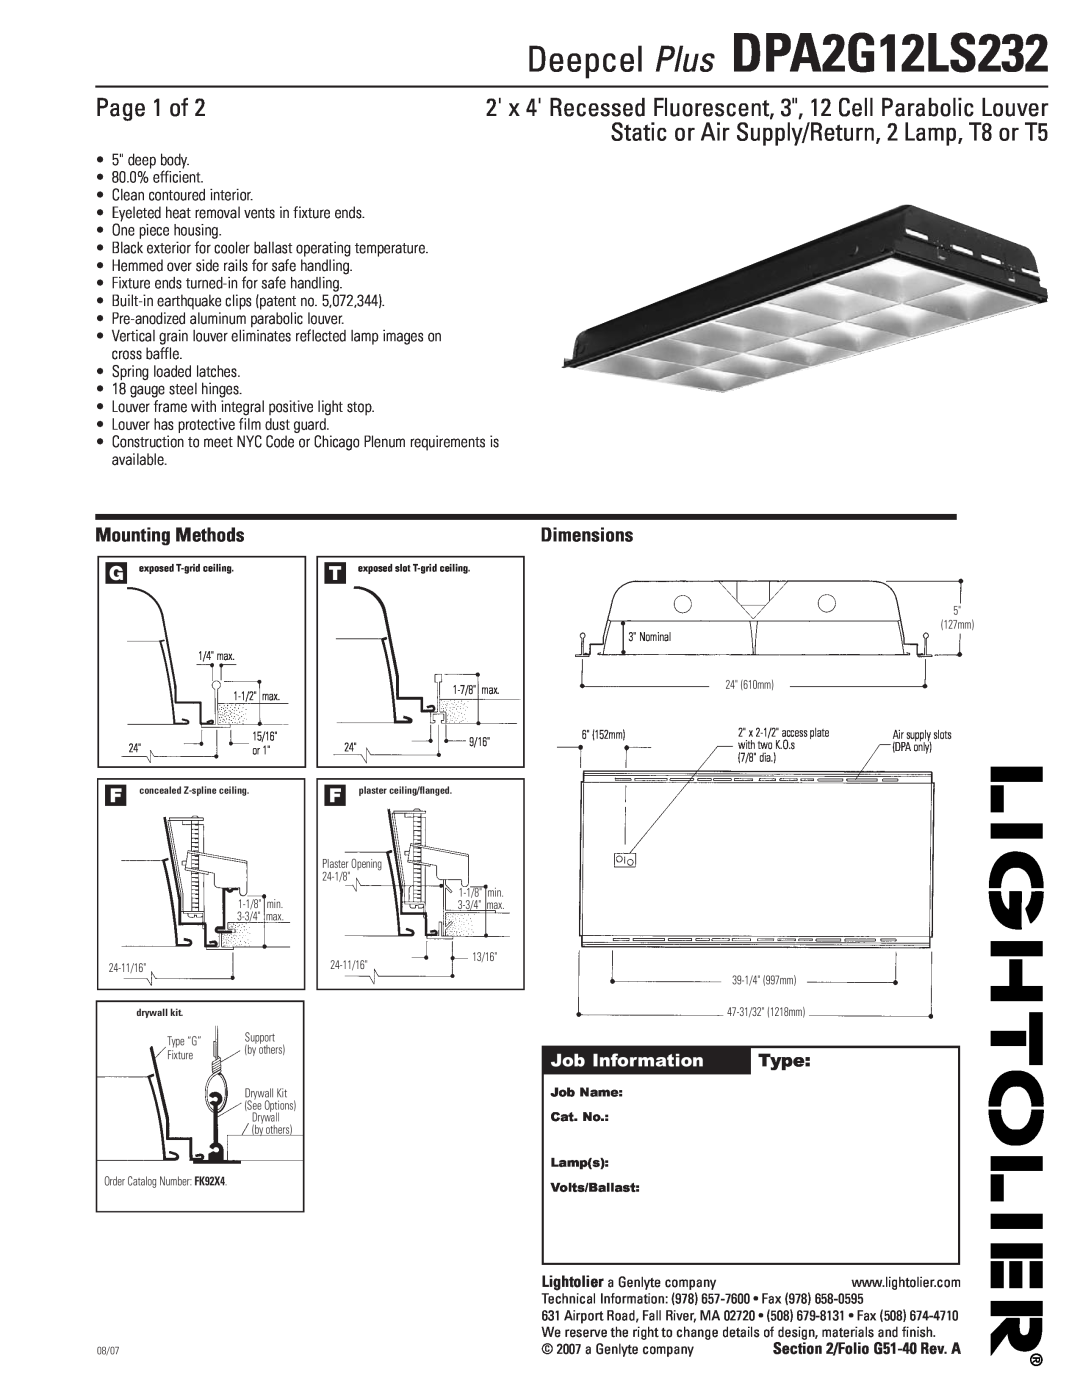 Lightolier DPA2G12LS232 dimensions Page 1 of, Static or Air Supply/Return, 2 Lamp, T8 or T5, Mounting Methods, Dimensions 